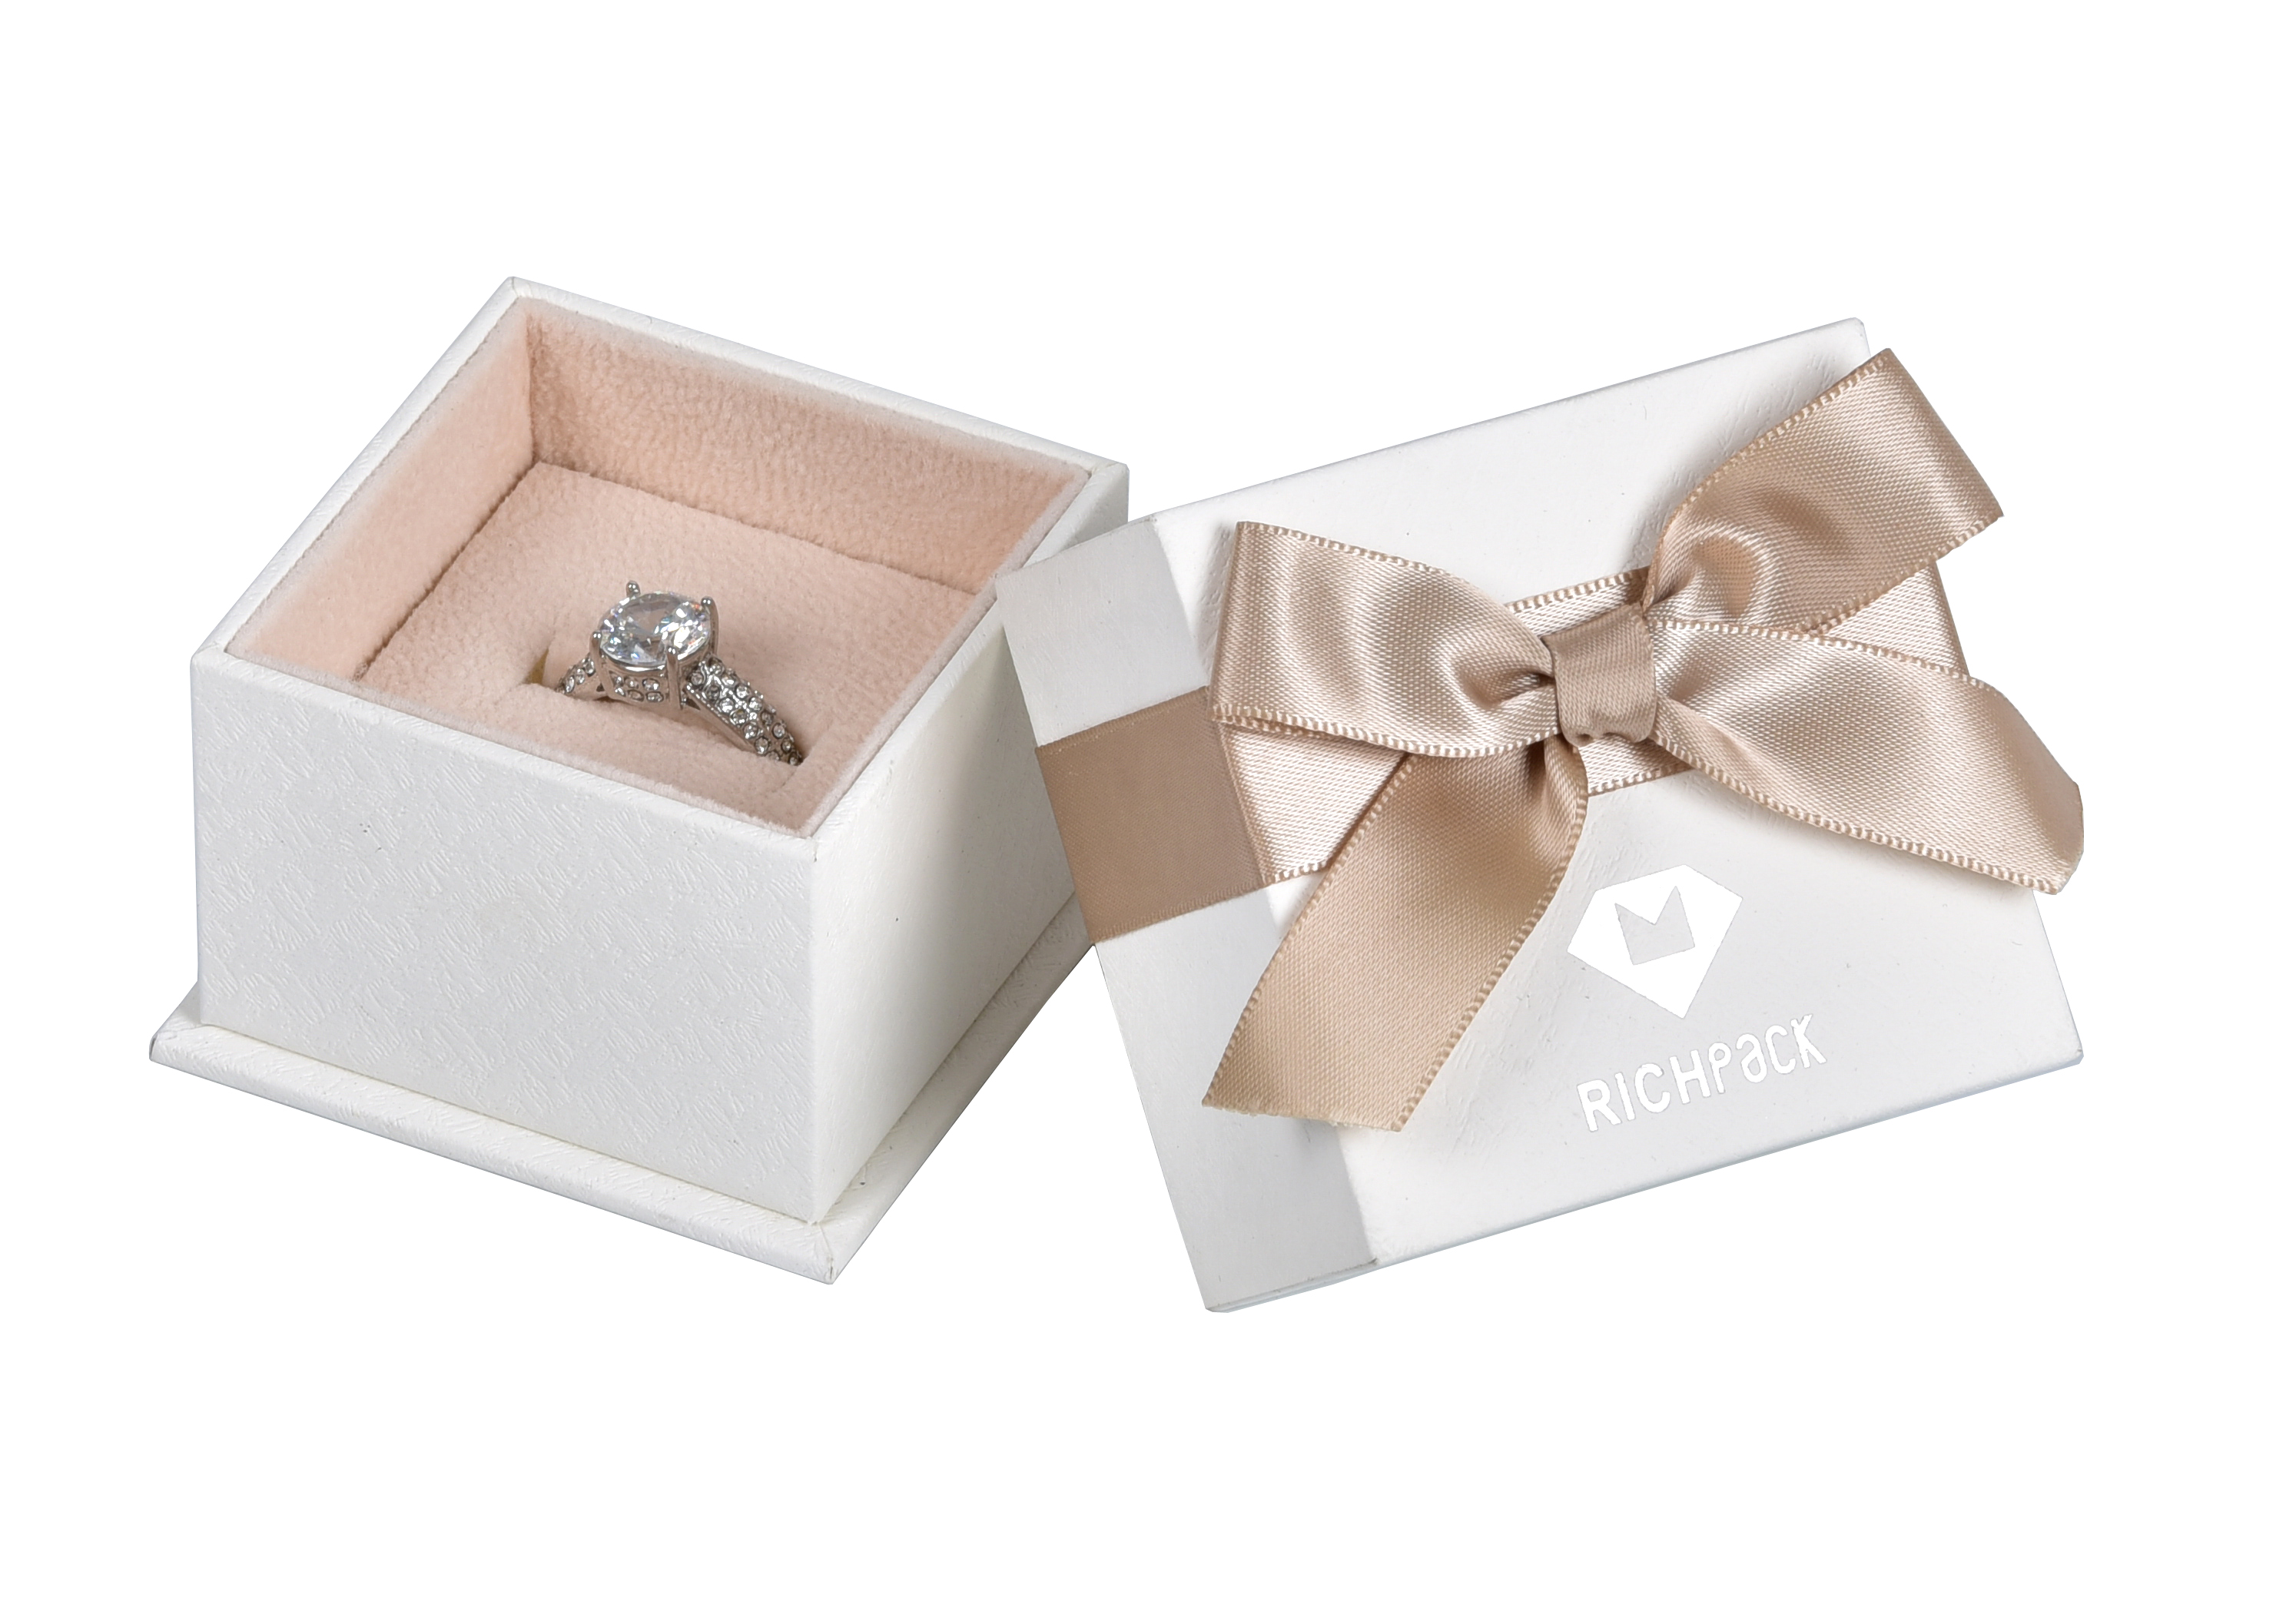 https://www.richpackfj.com/girl-jewelry-box-with-ribbon-for-gift-product/